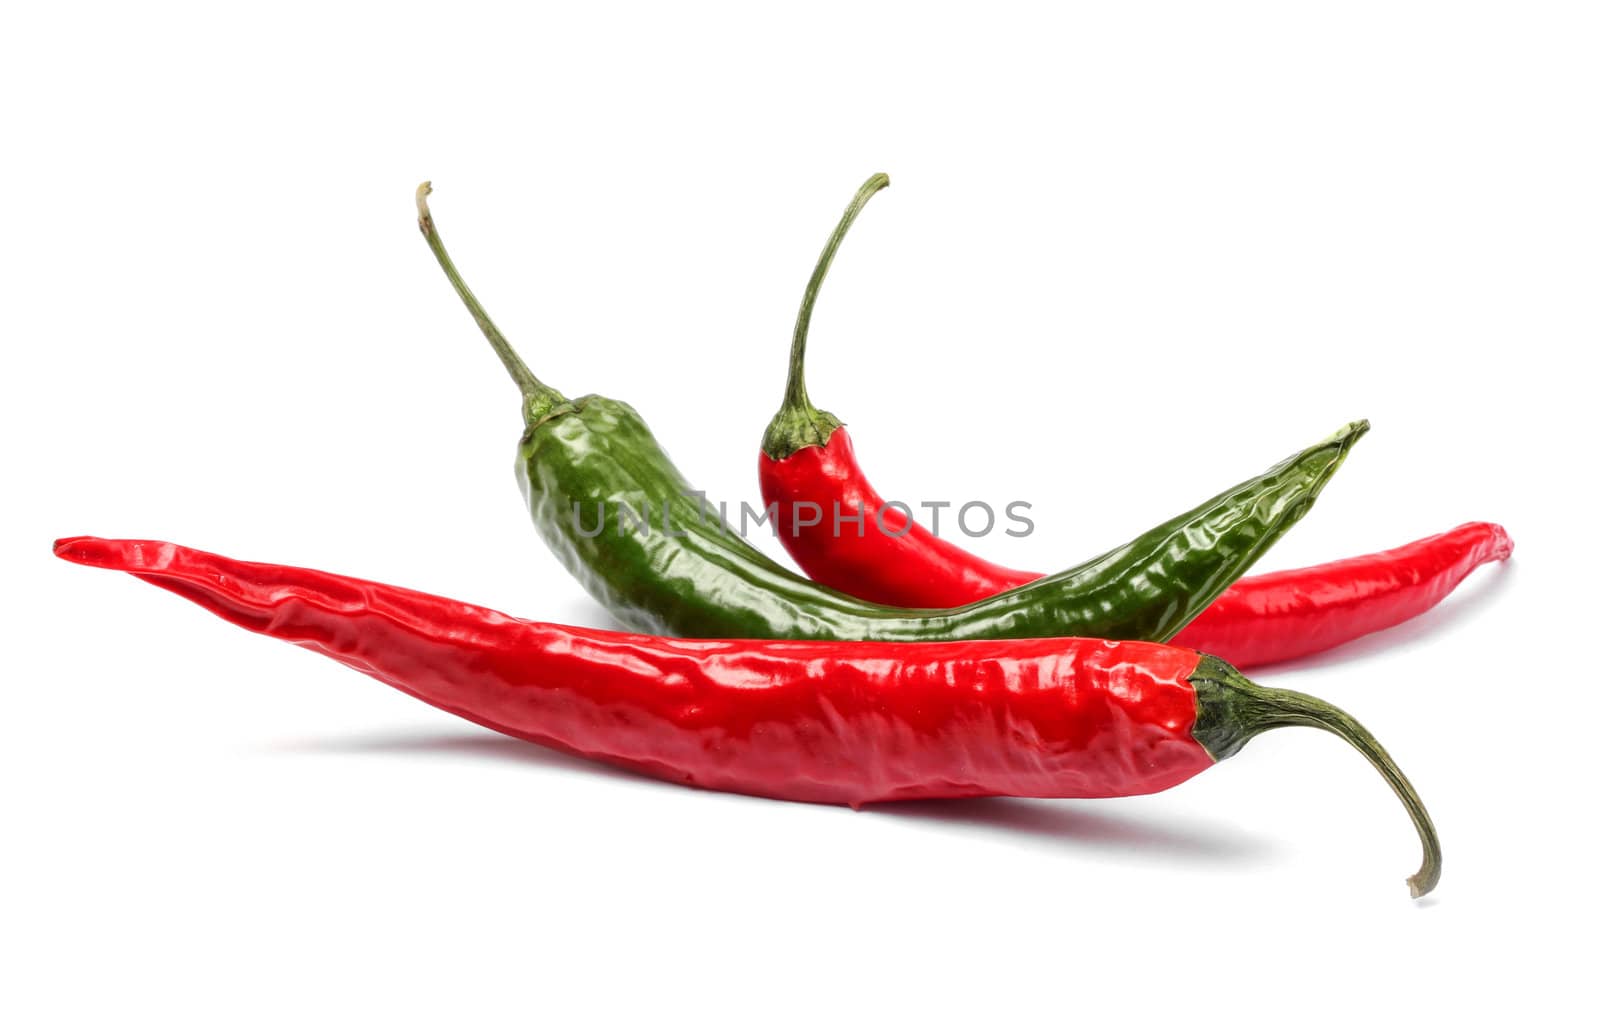 Red and green chili peppers isolated on white